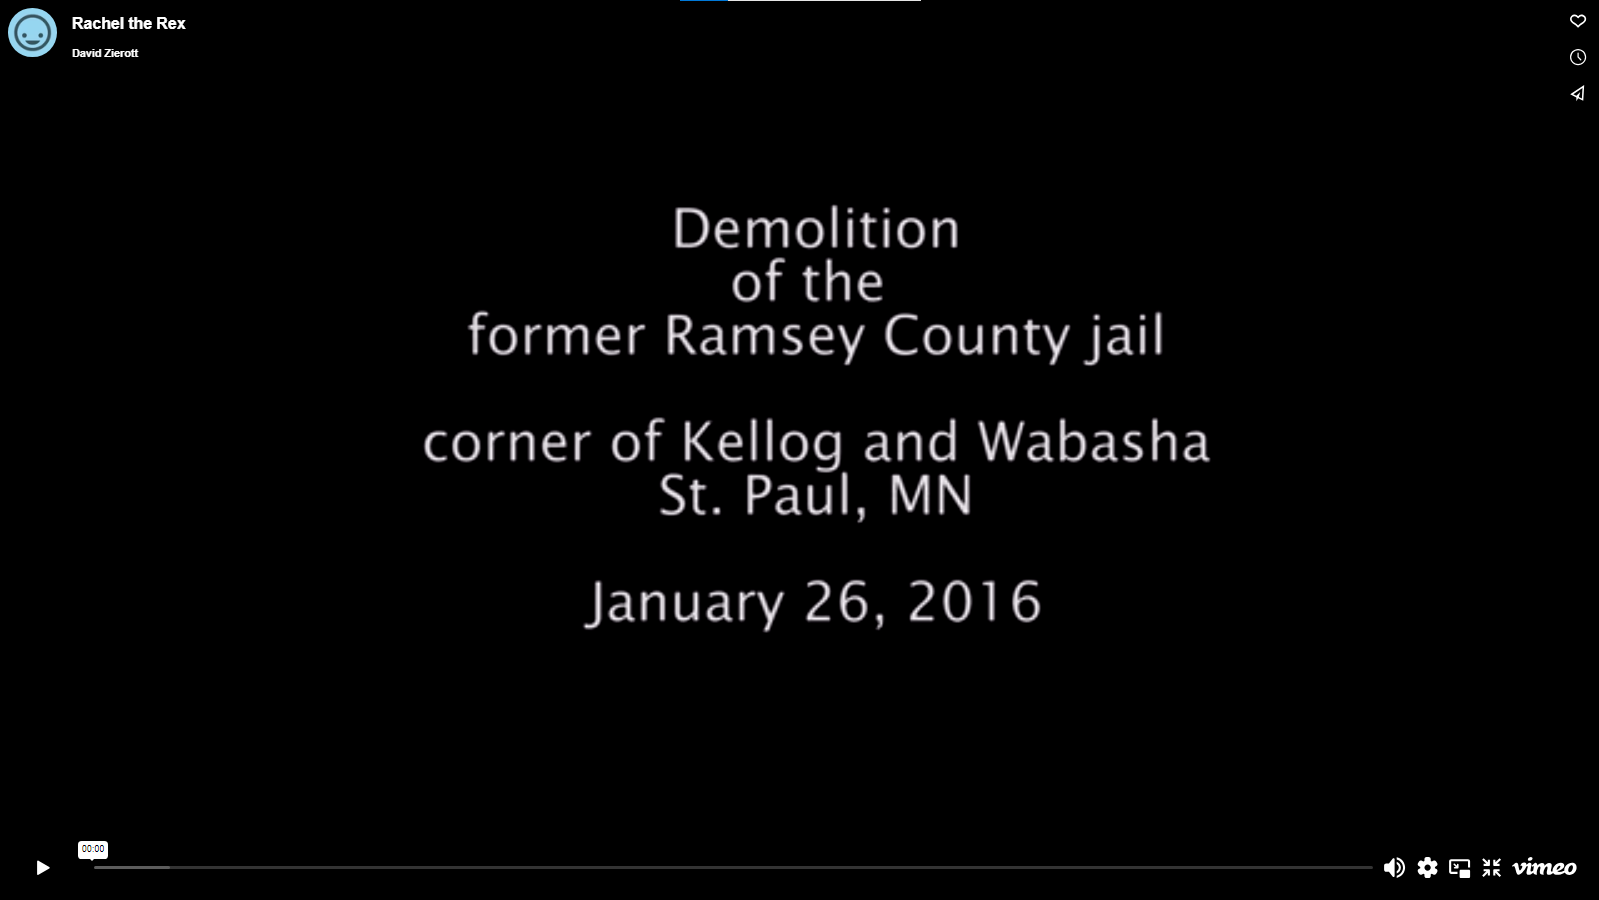 Ramsey County Demolition Featured